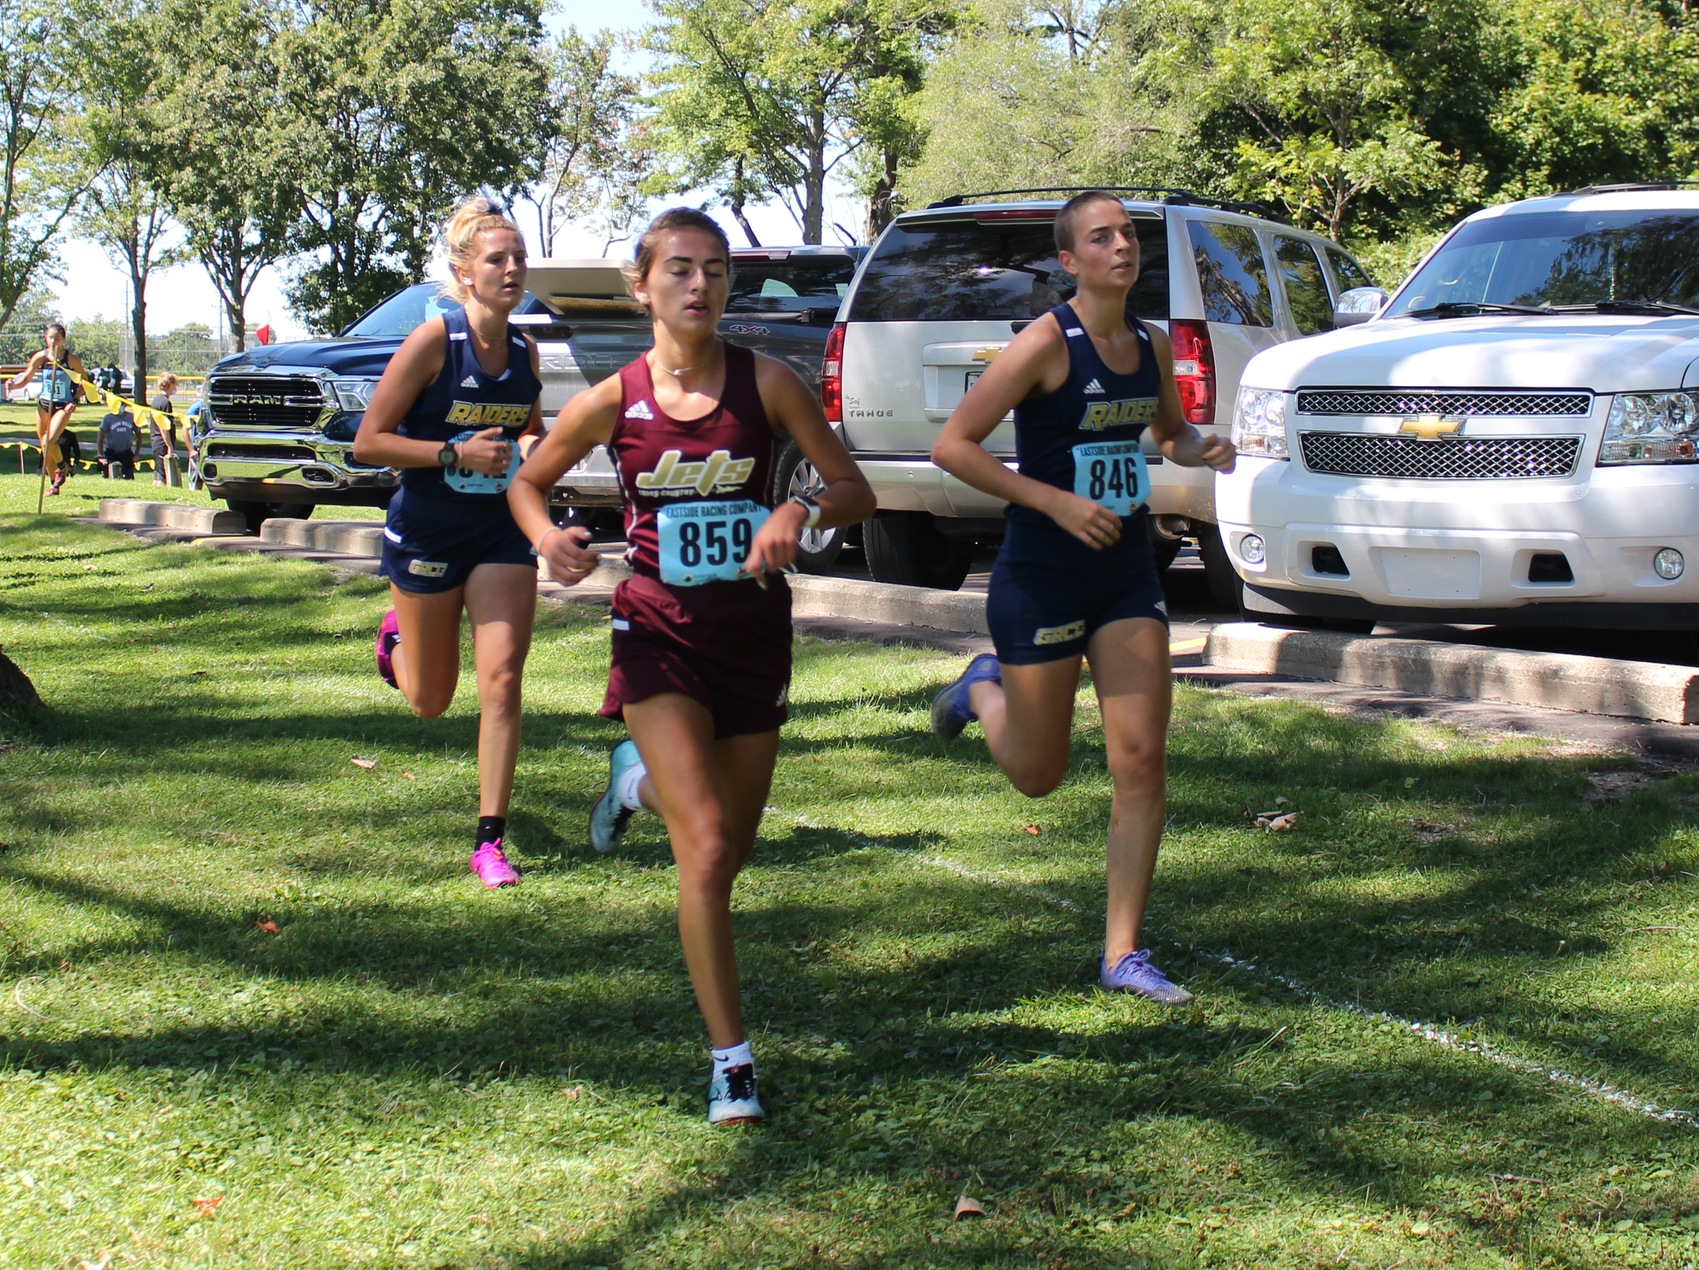 Runners compete at Skippers Invite